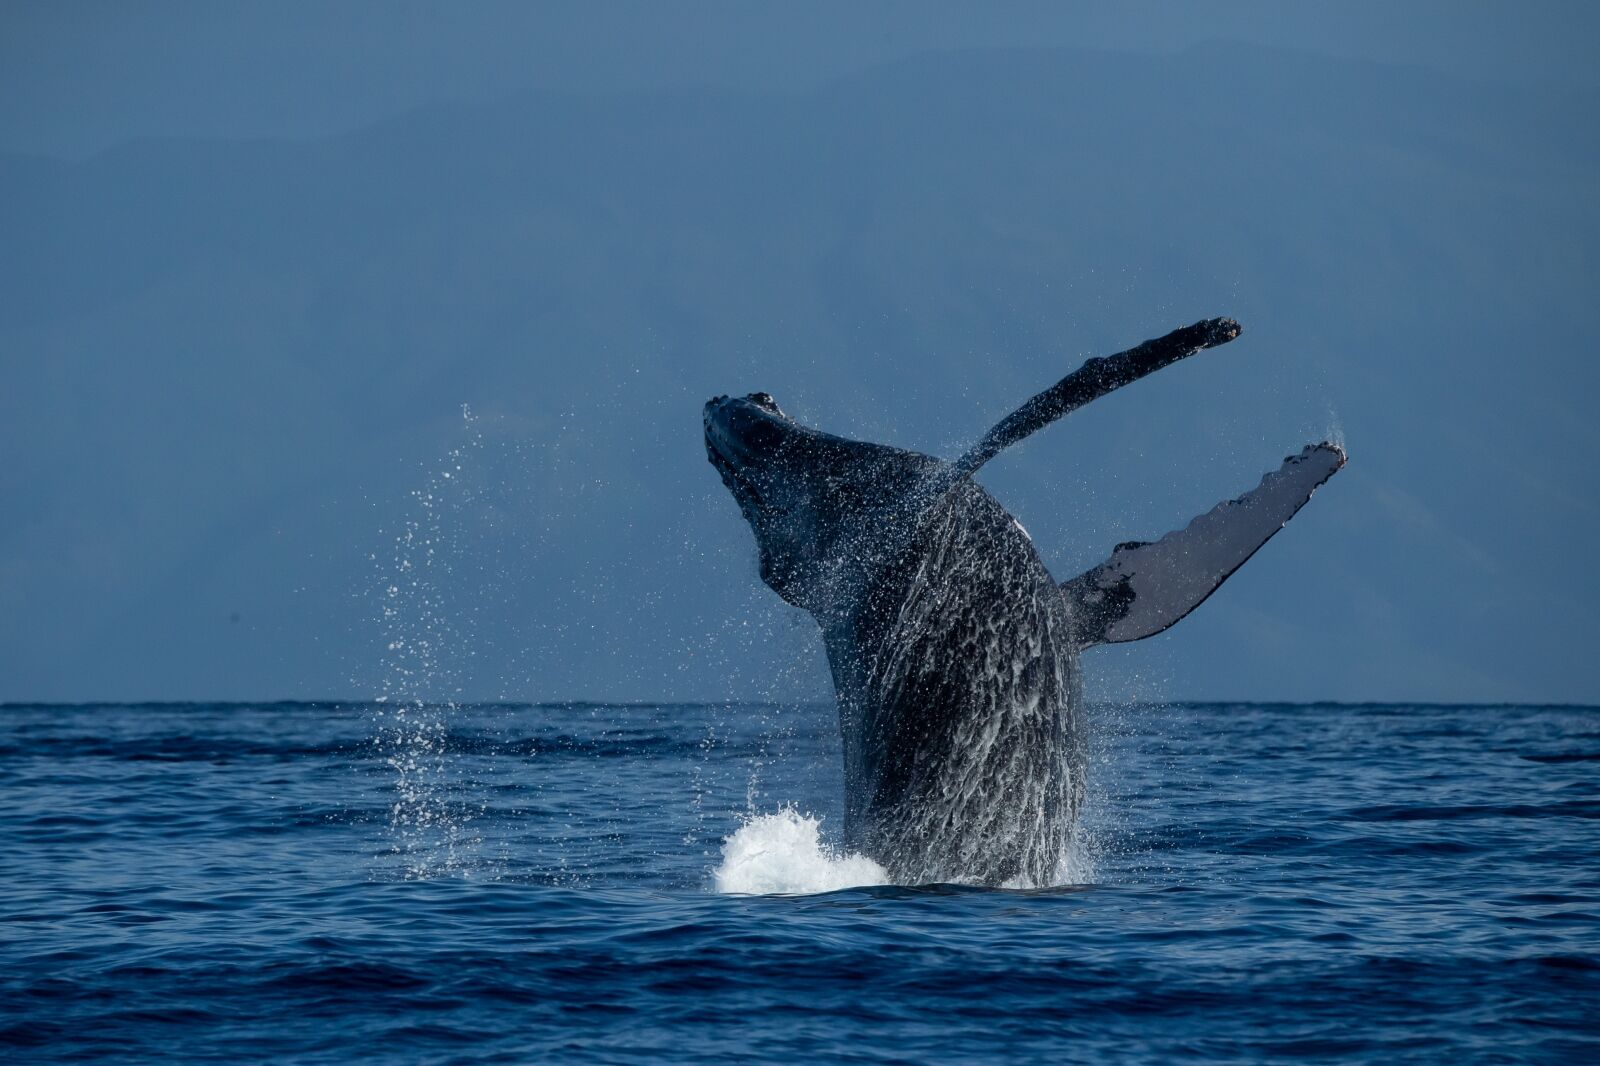 Humpback Whale breaches in spectacular fashion in Lahaina Roads, Hawaii. Humpback Whales winter in Hawaii and give birth in the shallow waters between Maui and Molokai.